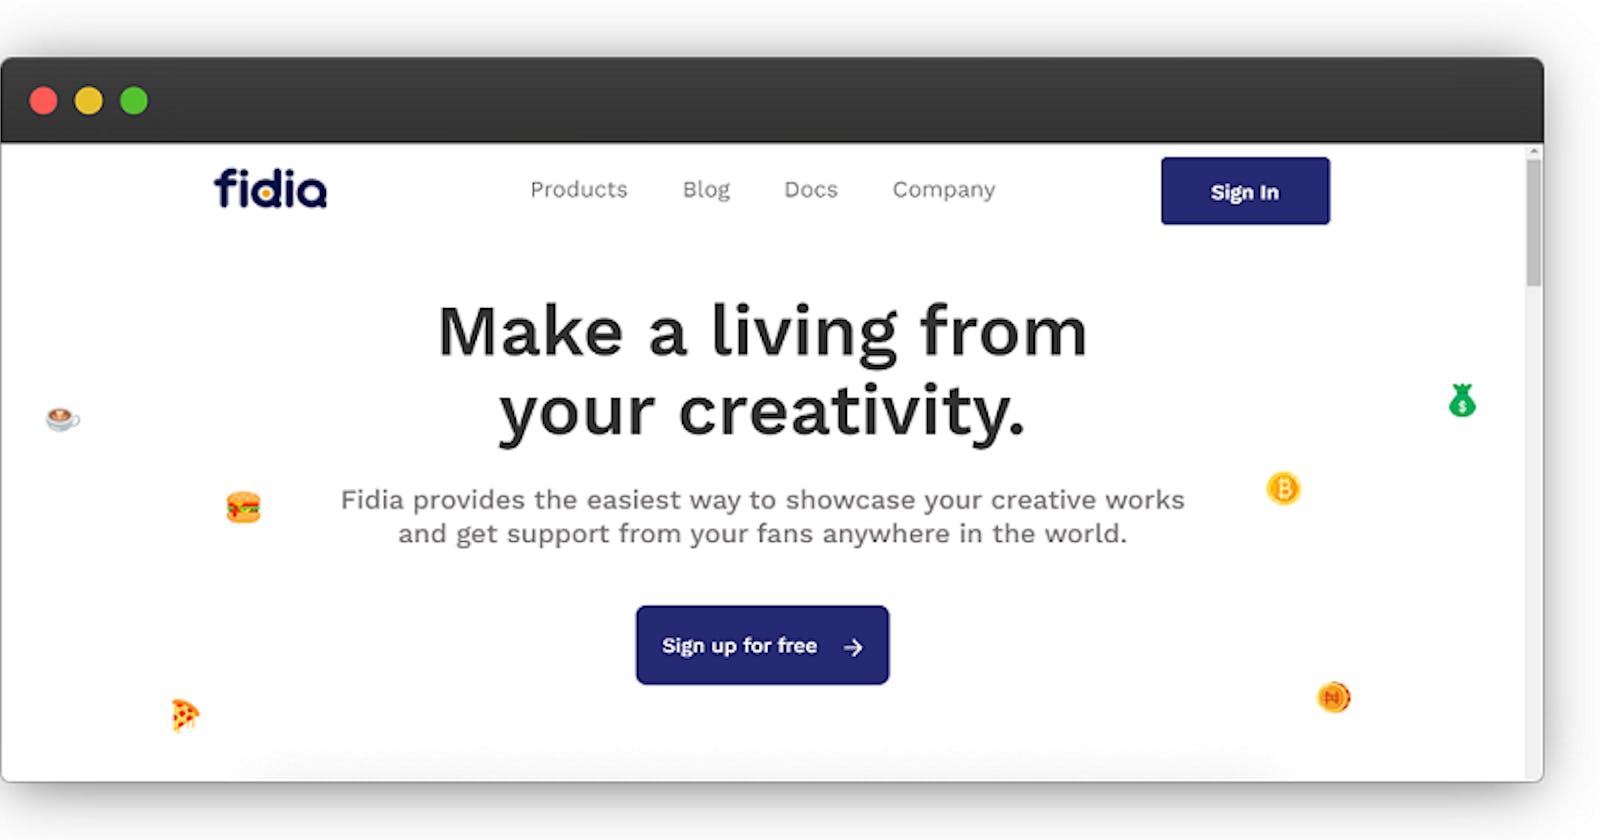 INTRODUCING Fidia: Easy way to get support and make a living from your creativity.